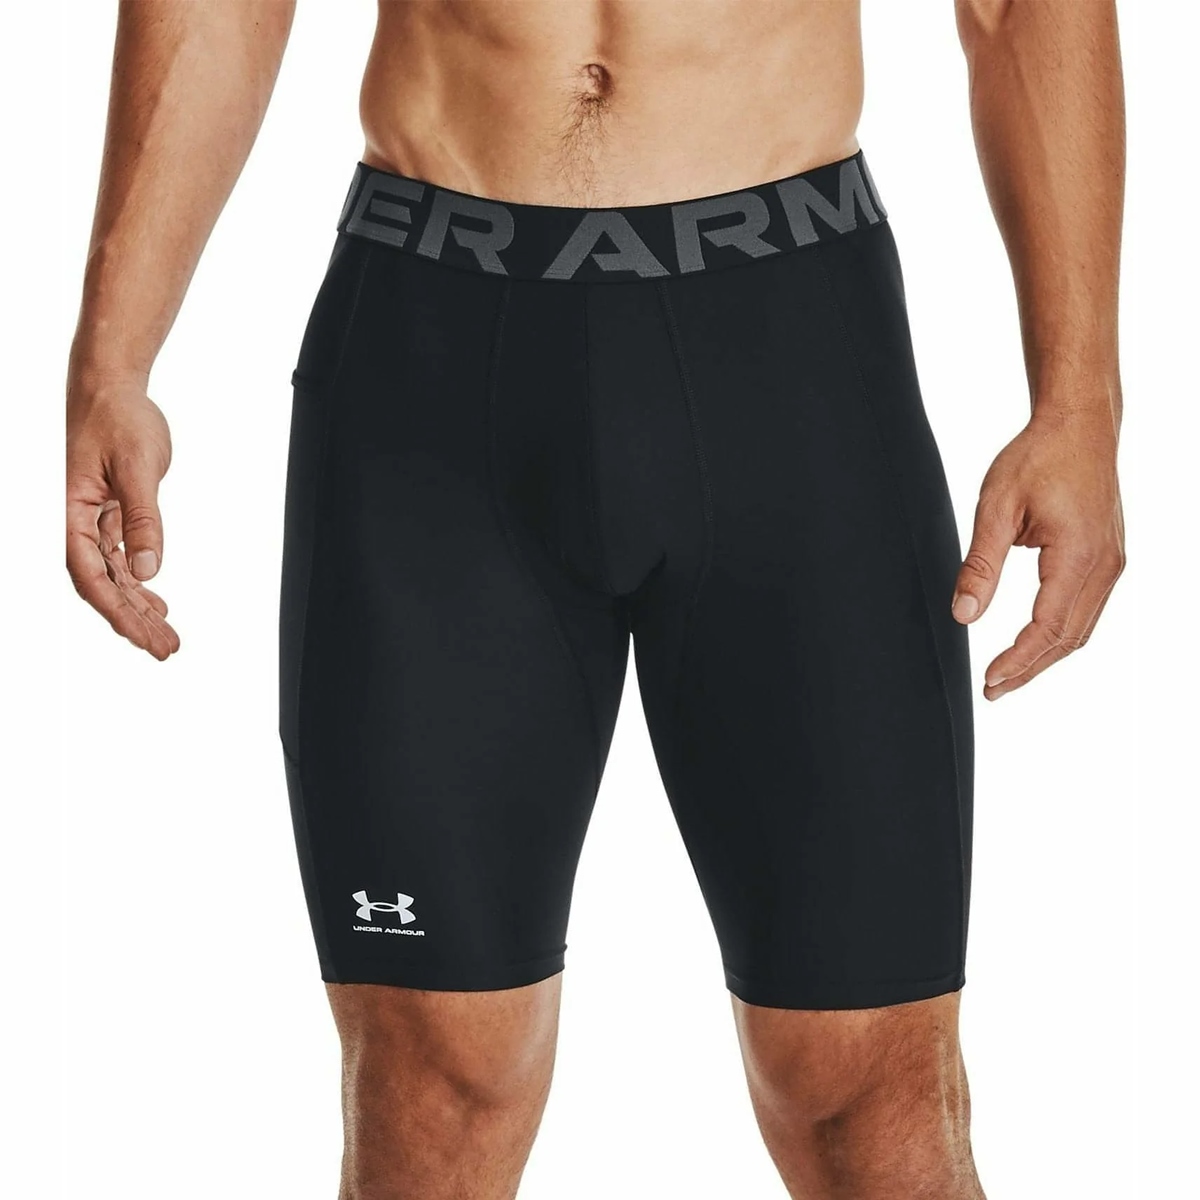 15 Incredible Men’s Long Compression Shorts For 2023